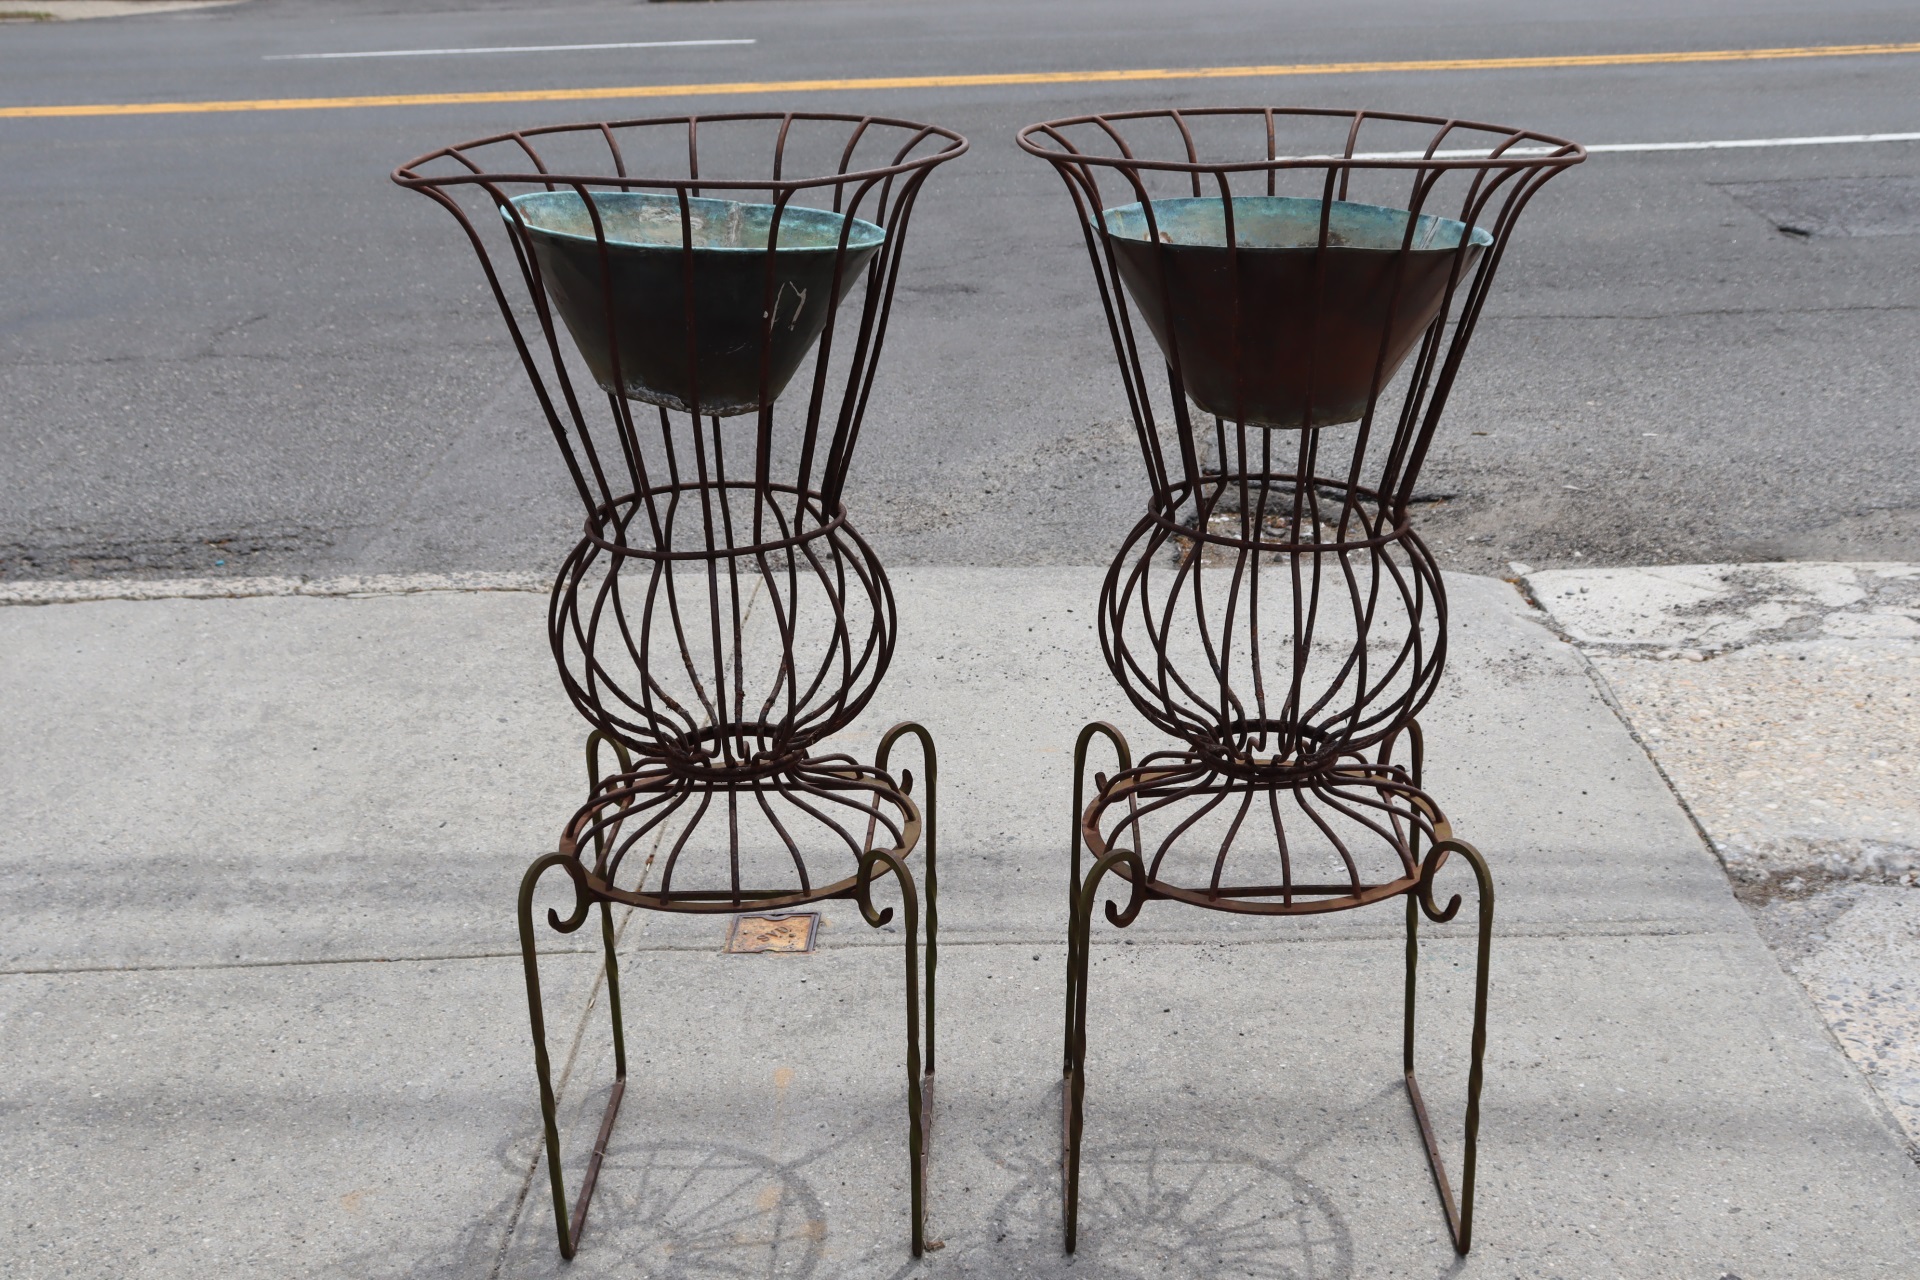 AN ANTIQUE PAIR OF IRON PLANTERS